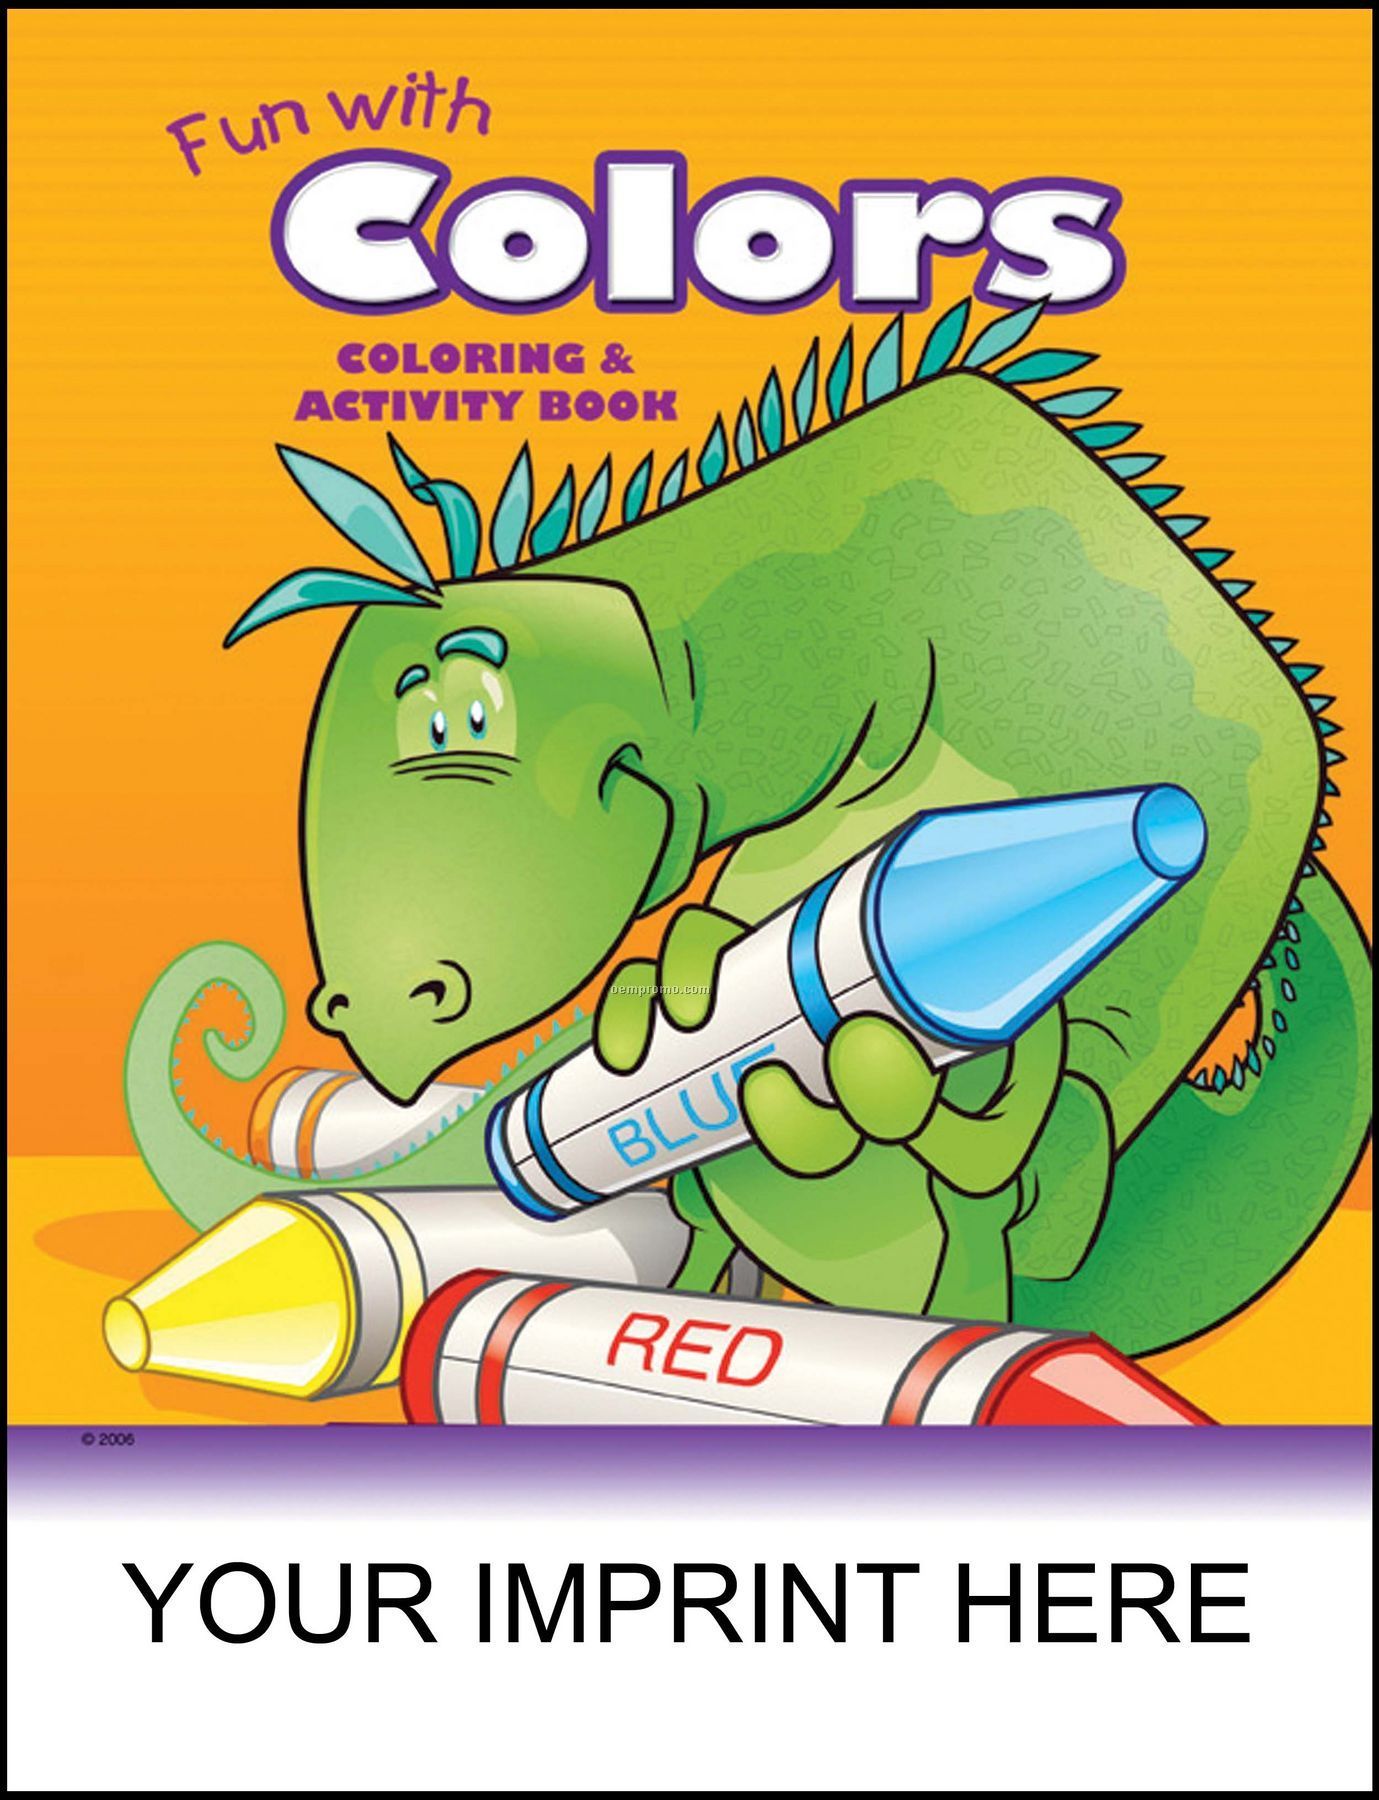 Fun With Colors Coloring & Activity Book